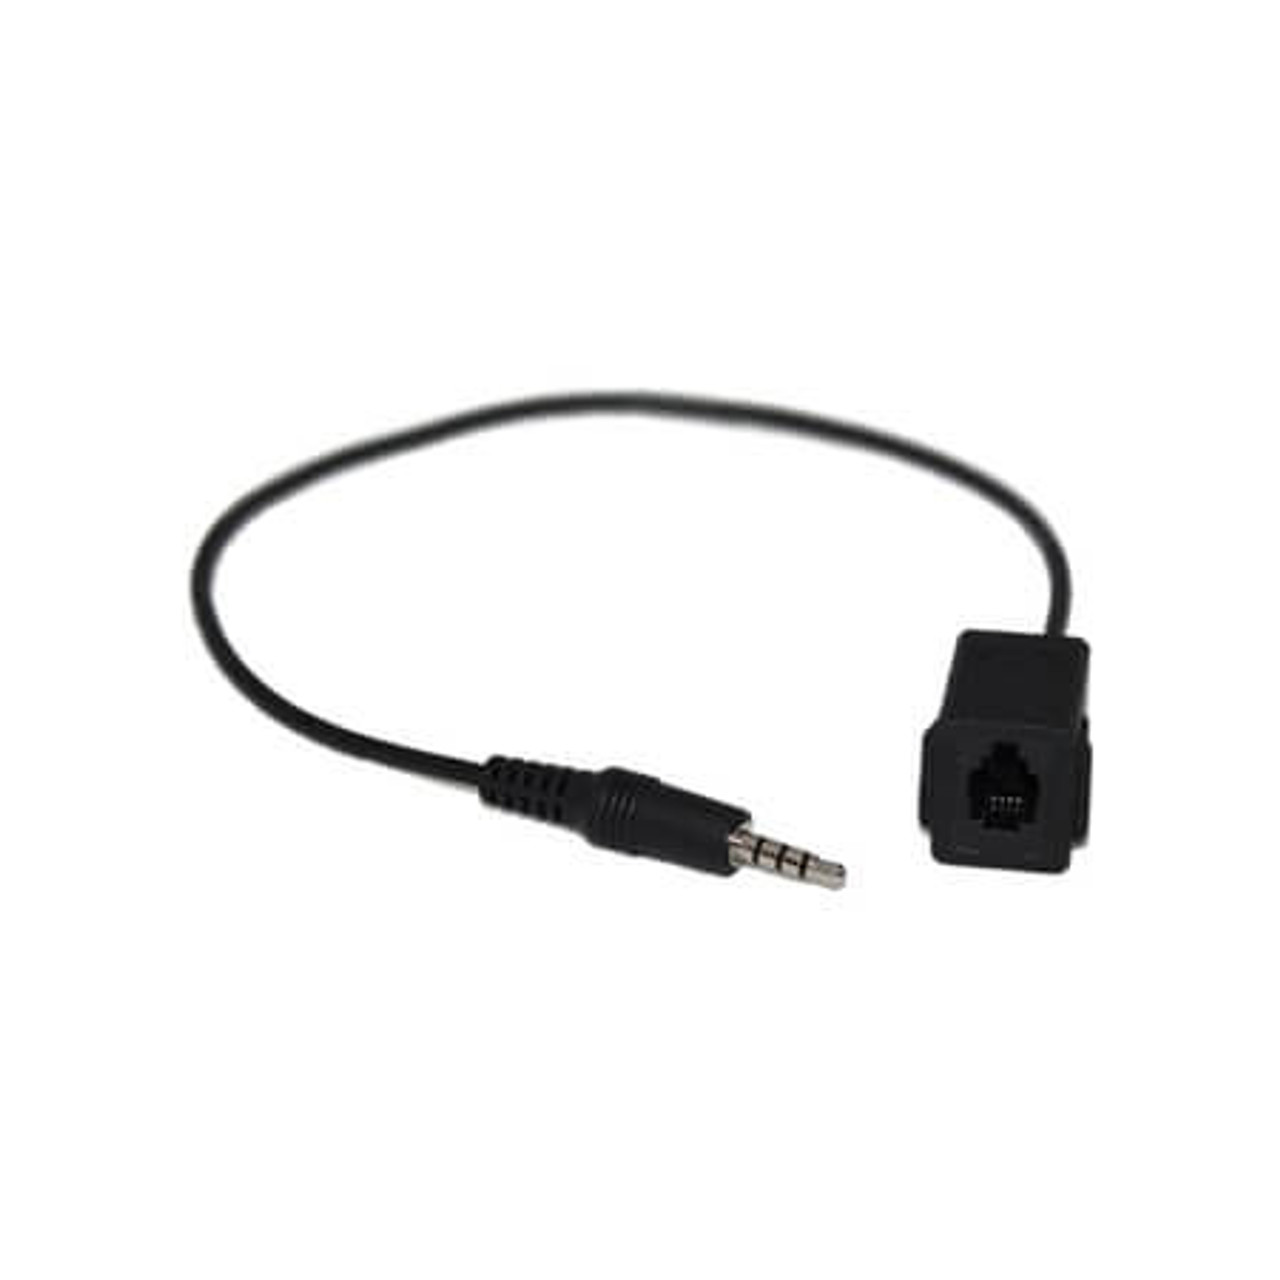 Female RJ9 to Male 3.5mm Headset Adapter | RJ9 Female to 3.5mm Male